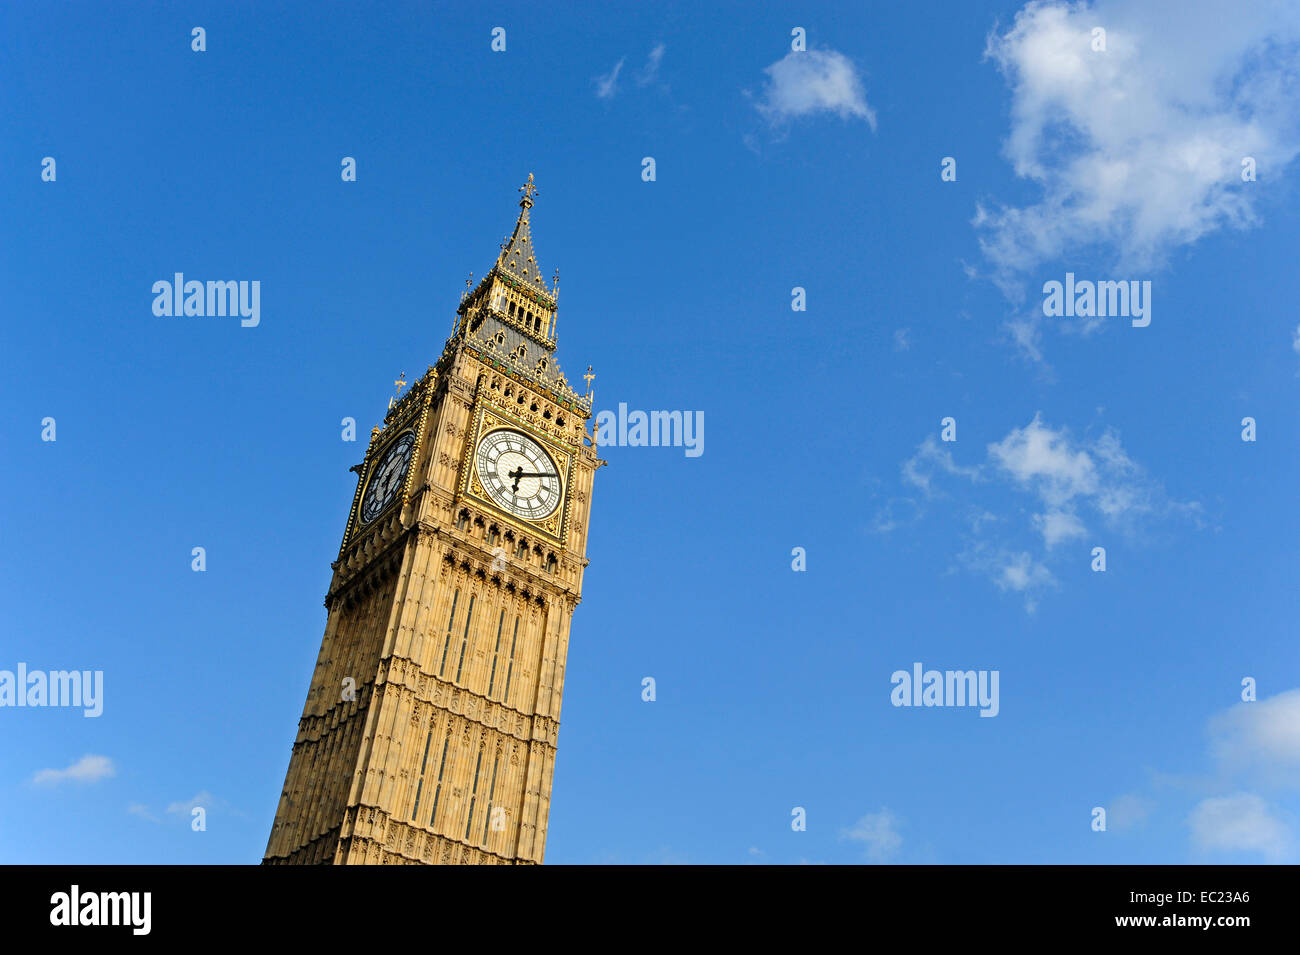 Big Ben, Elizabeth Tower, Palace of Westminster, Houses of Parliament, UNESCO World Cultural Heritage site, London, England Stock Photo